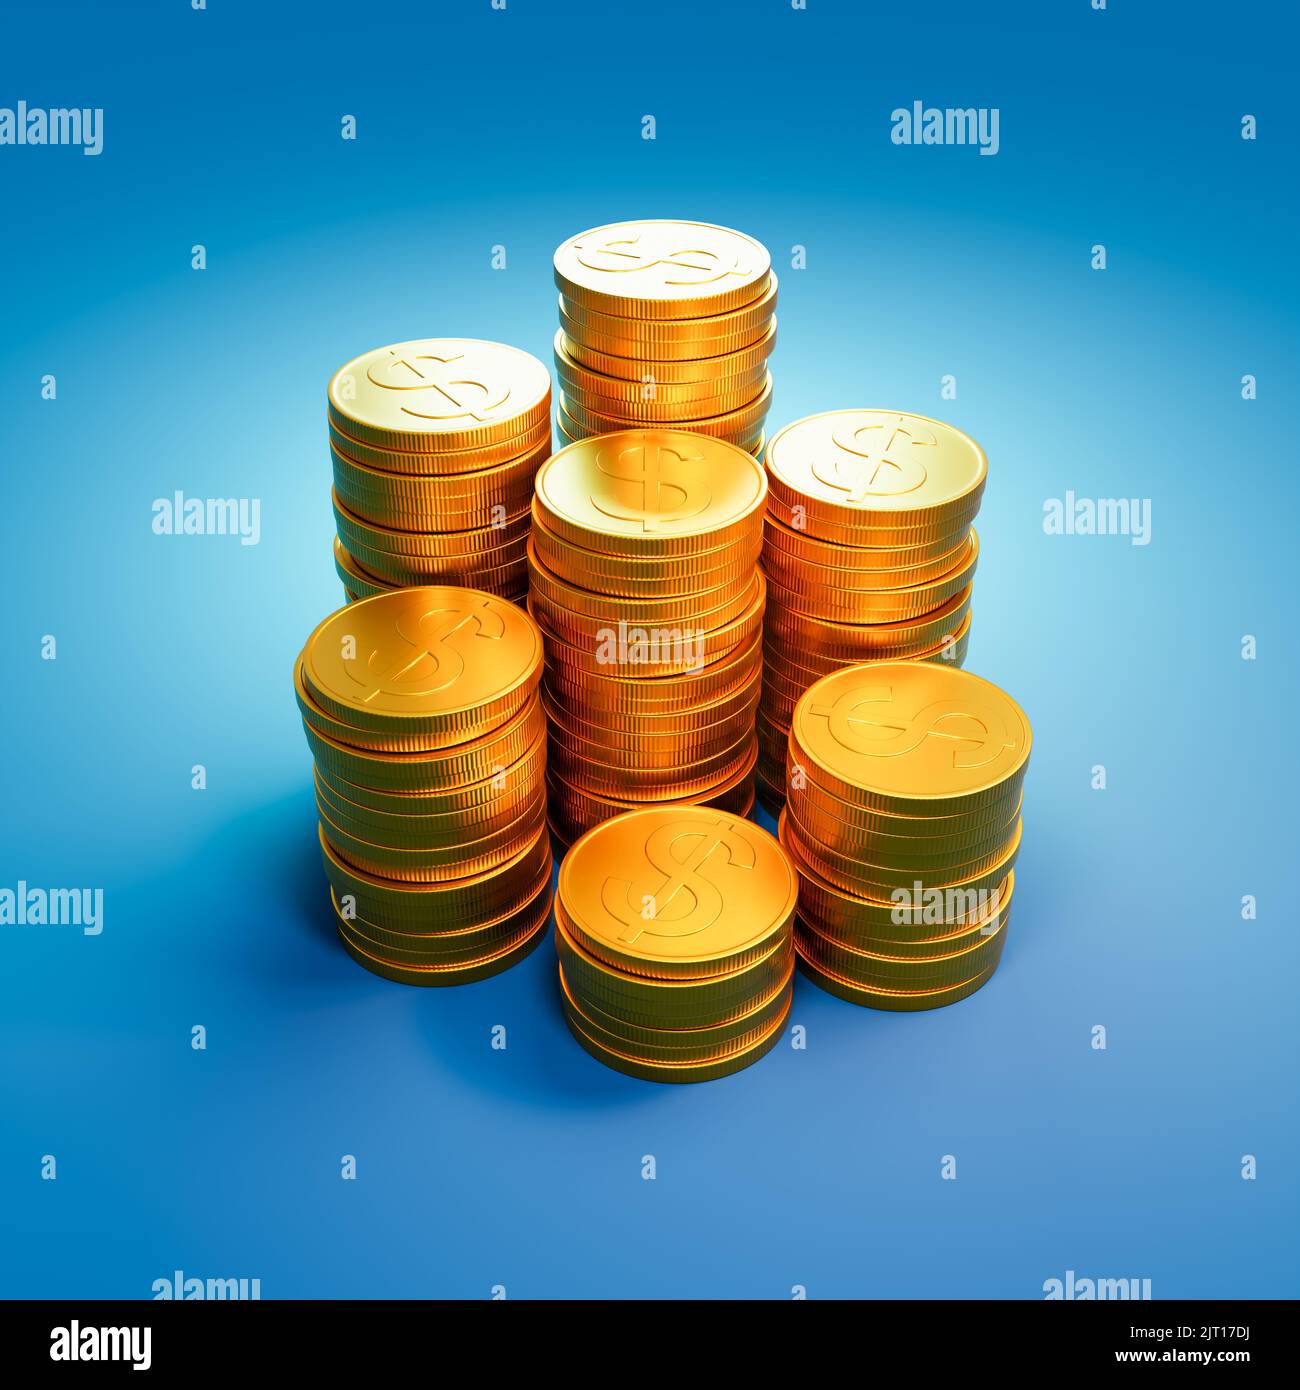 Heaps of Dollar Coins on Blue Background Stock Photo